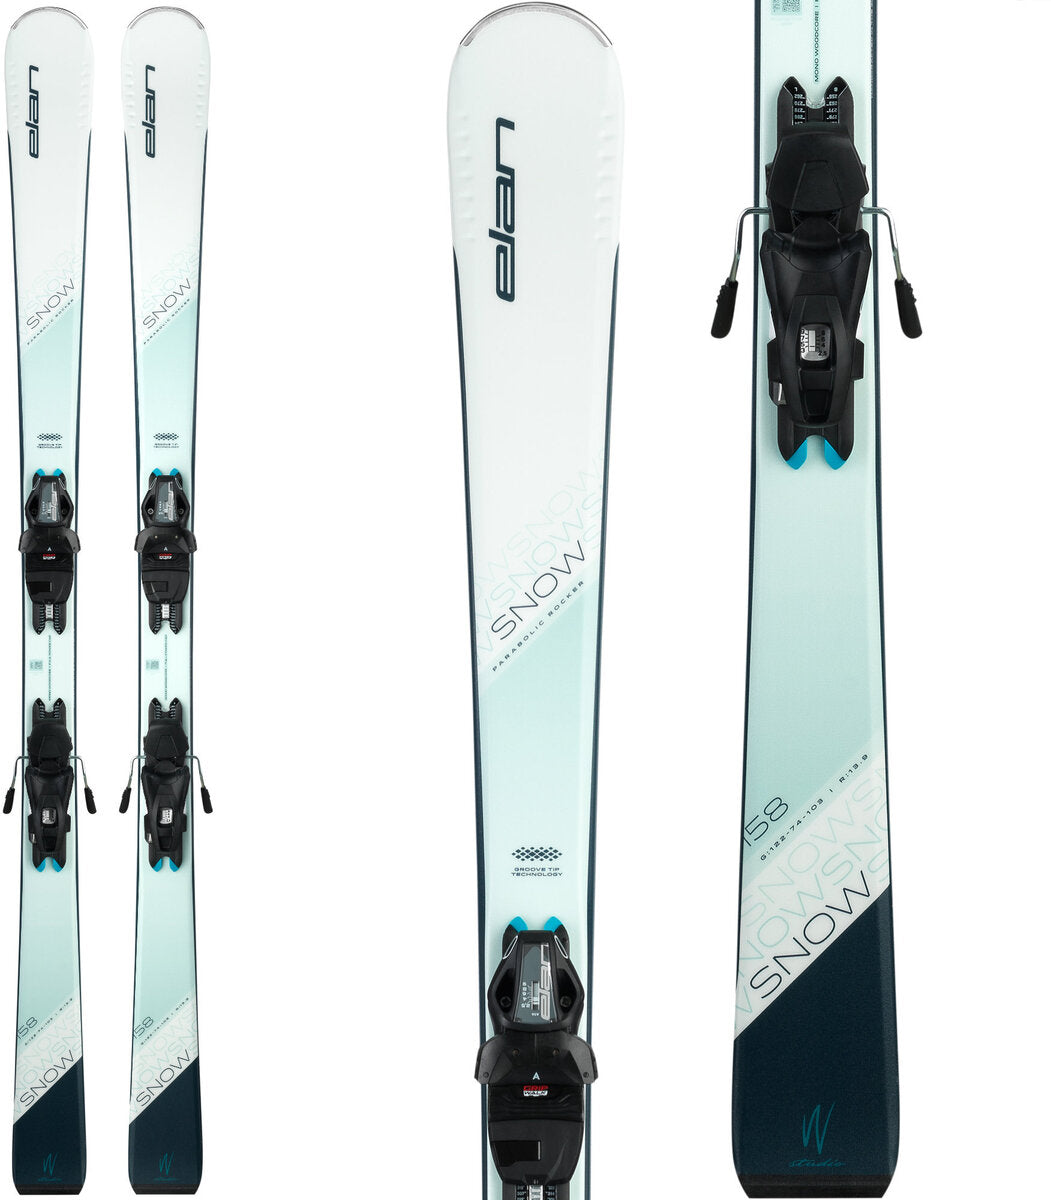 The Snow makes learning to ski fun, easy, and provides the perfect blend of comfort and stability.